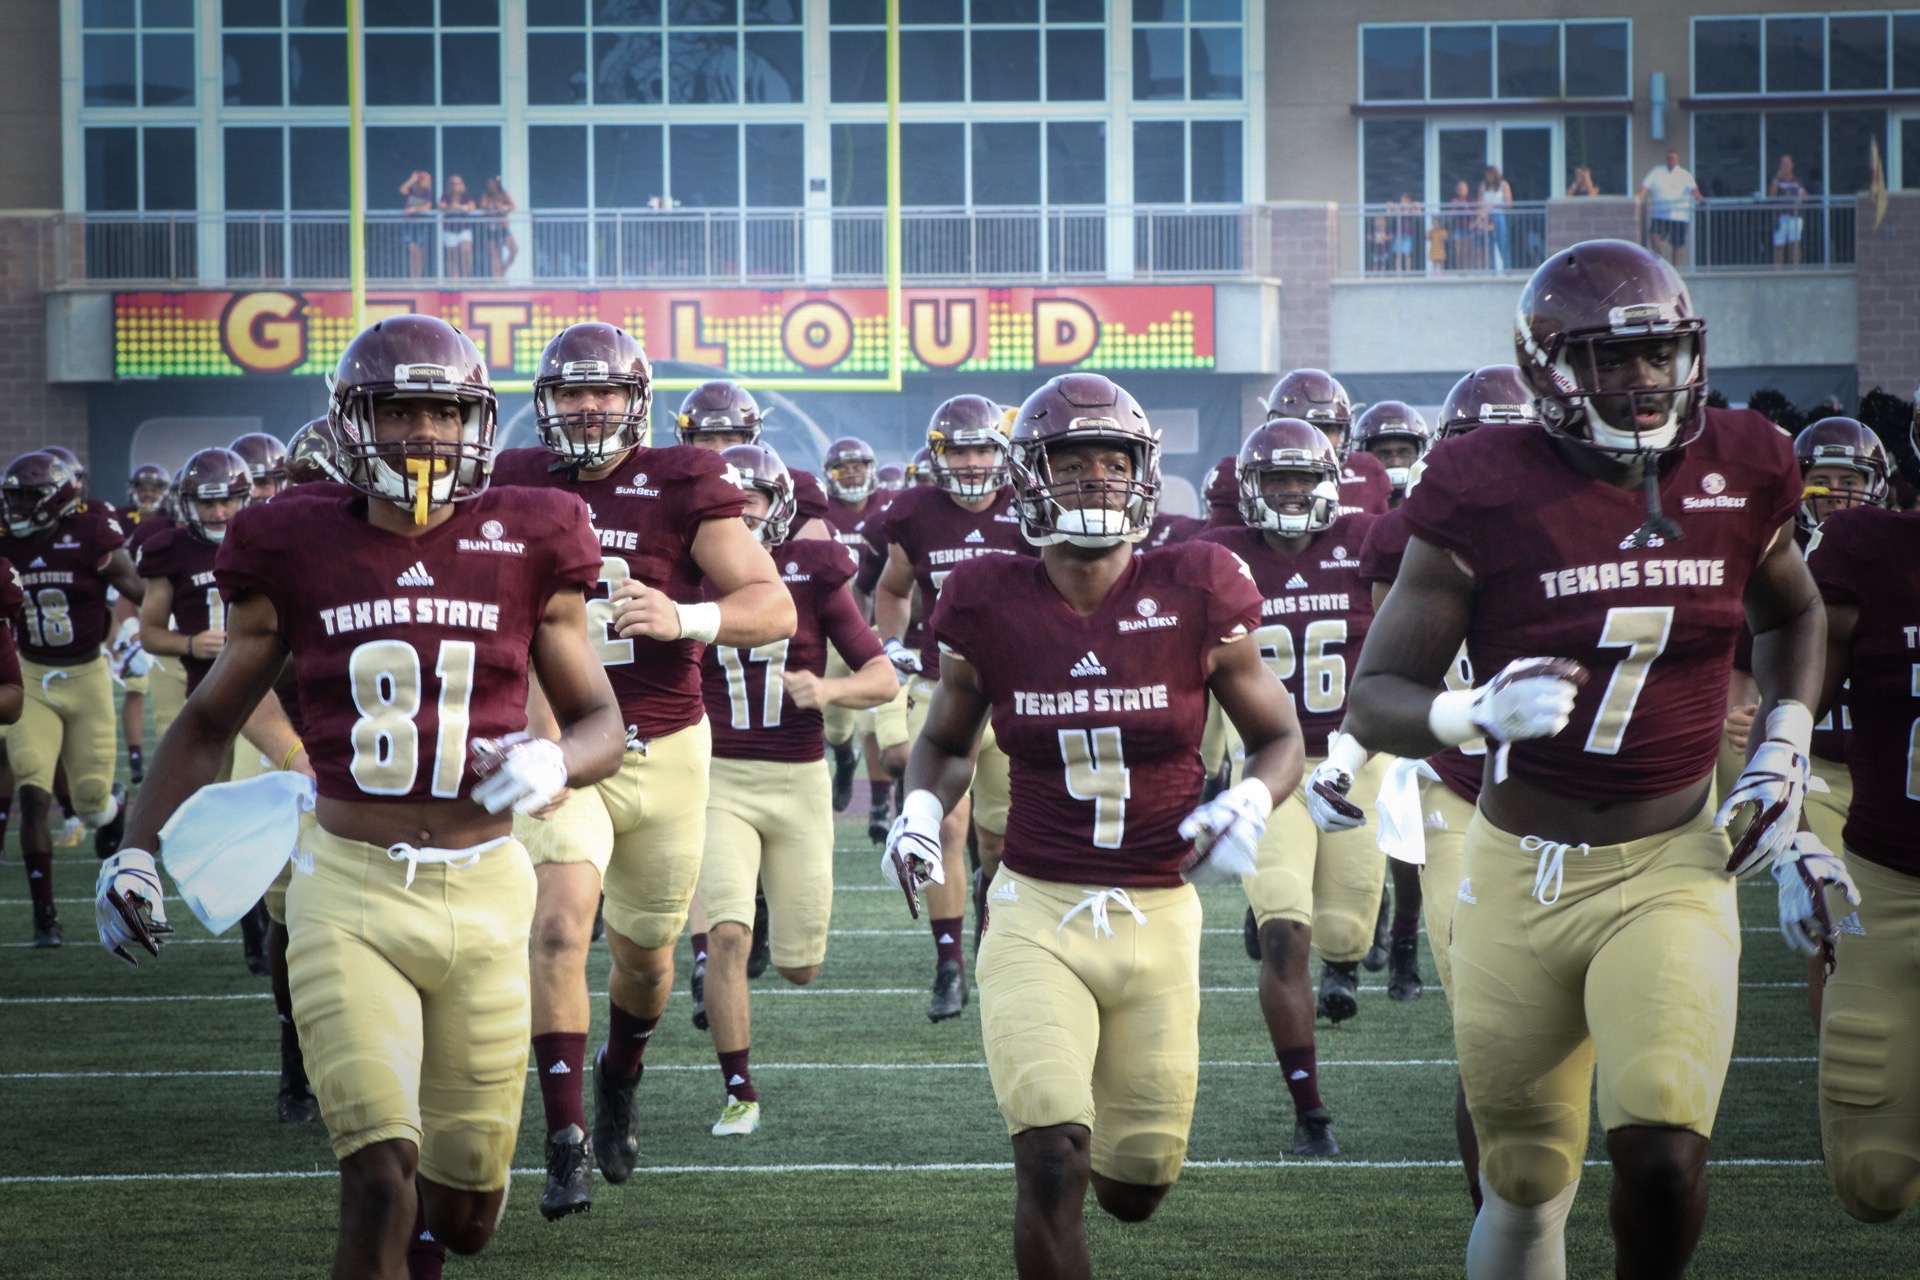 Texas State football players running onto field